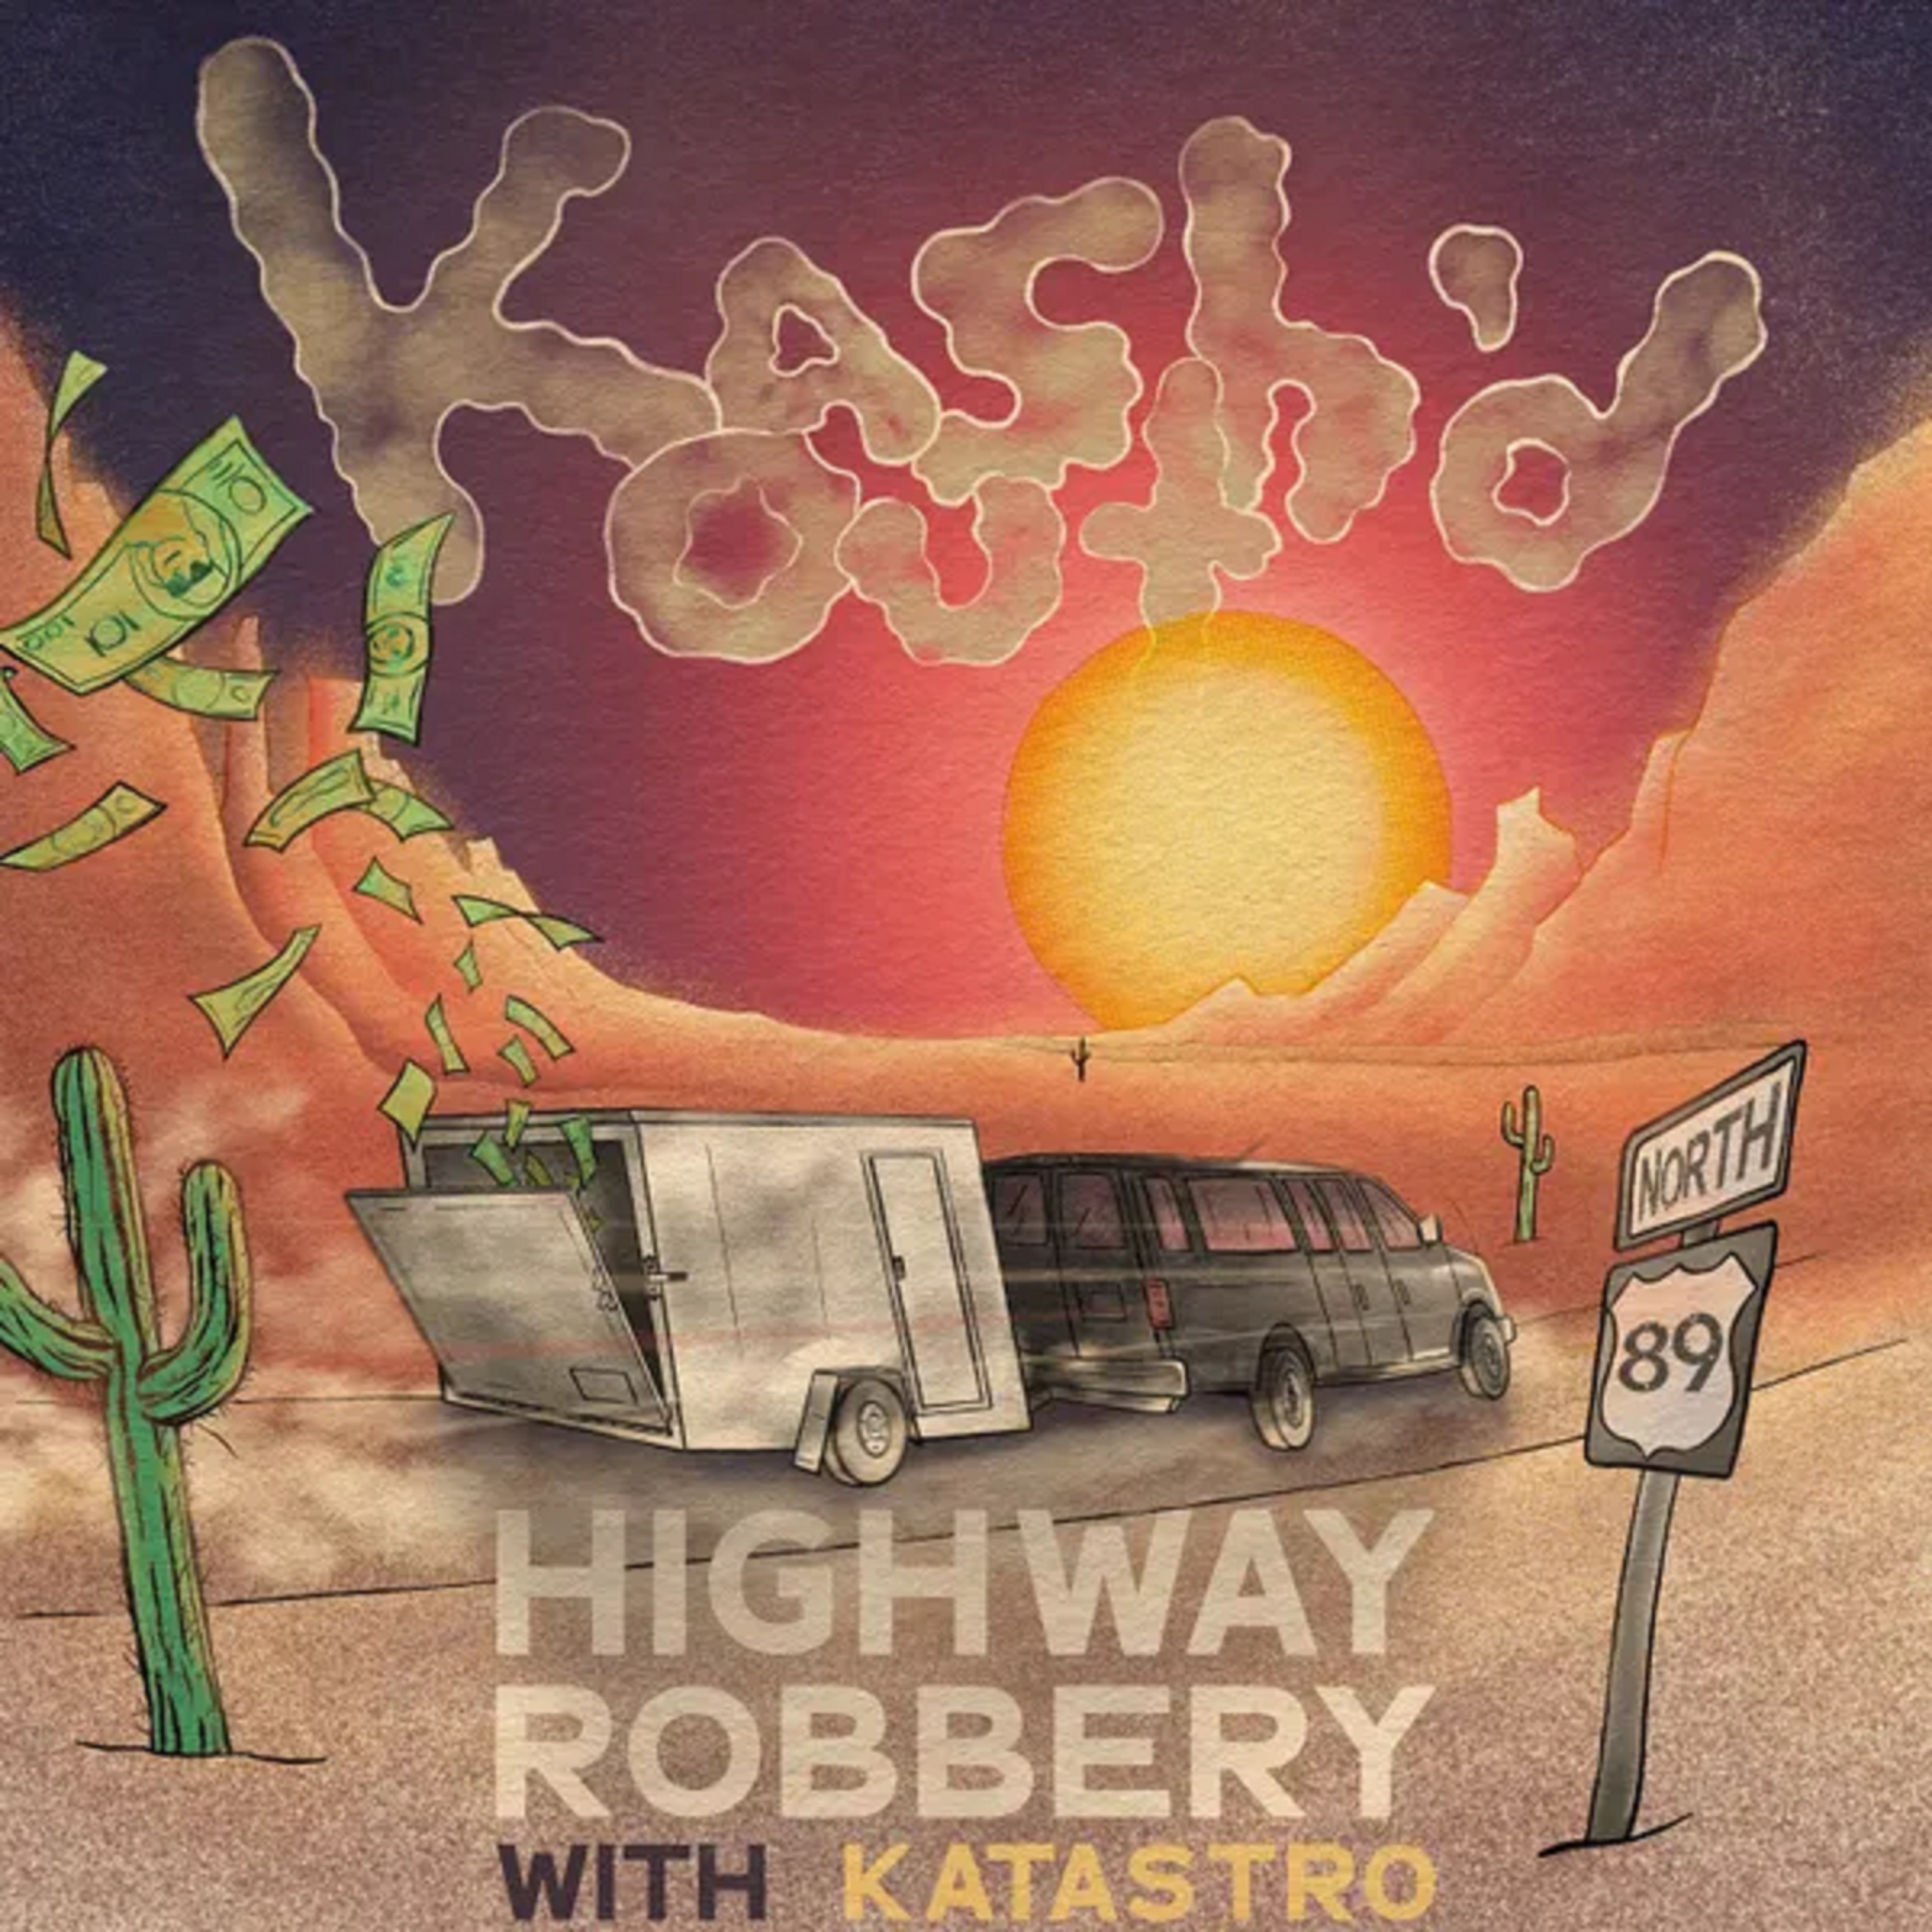 Kash'd Out release new single "Highway Robbery" + Tour with Iration